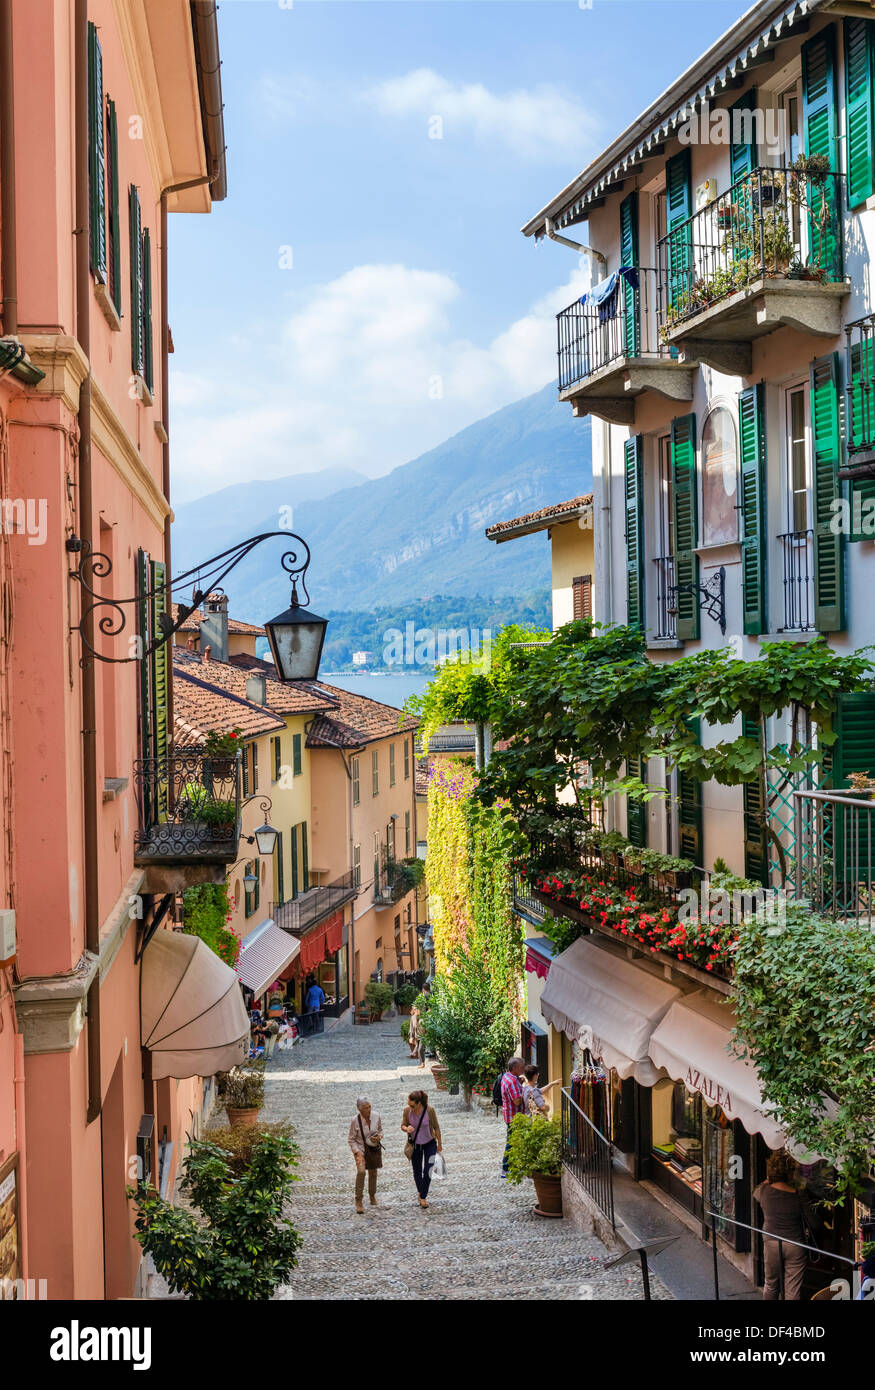 Shops on Salita Serbelloni in the historic old town with the lake in the distance, Bellagio, Lake Como, Lombardy, Italy Stock Photo